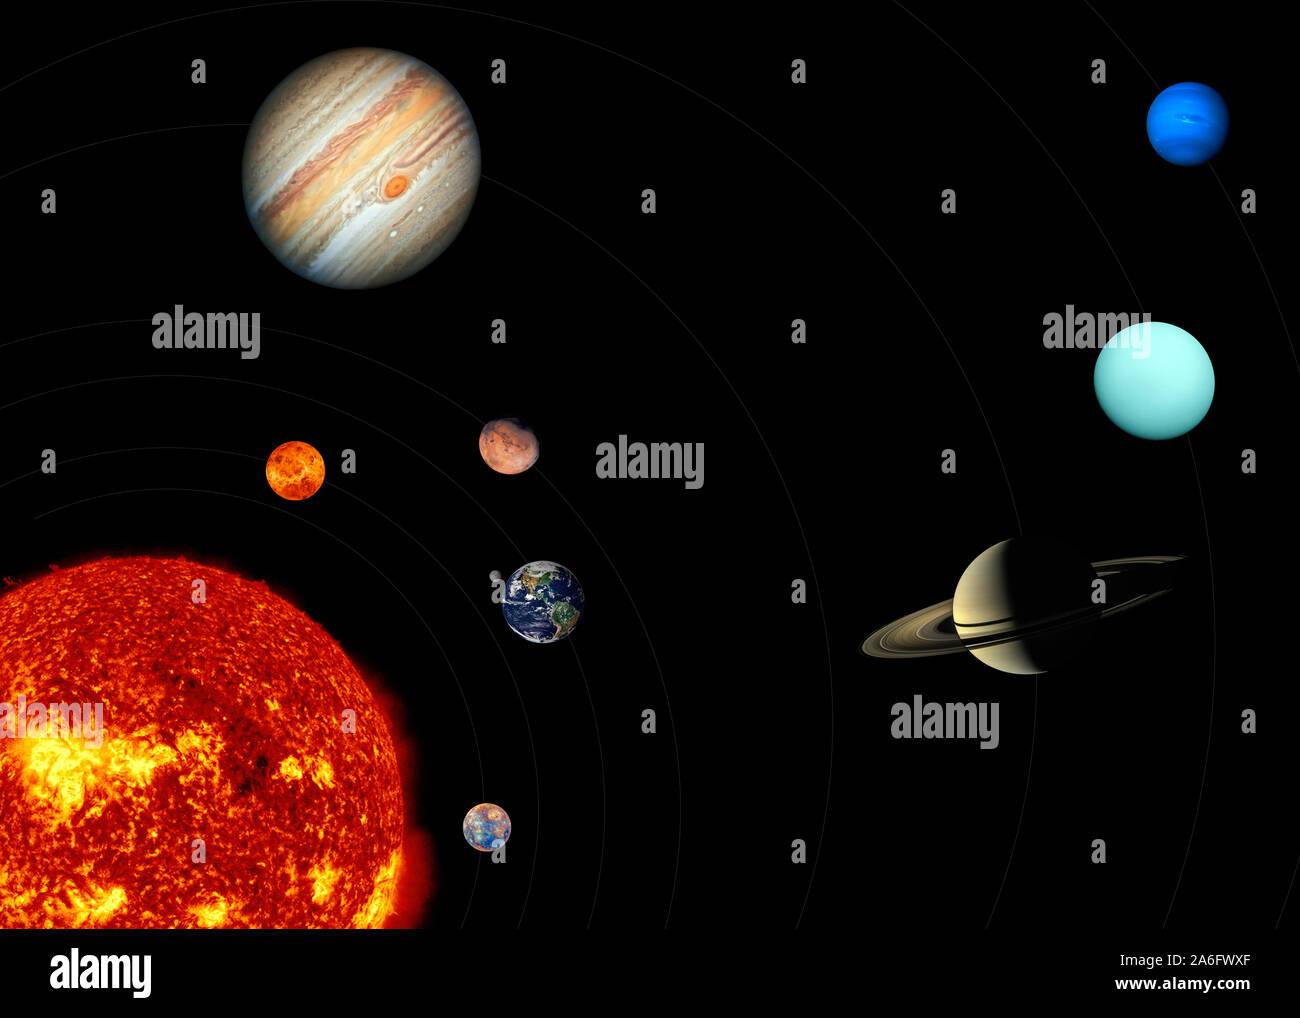 Solar System with sun and planets in orbit on black.  Planetary photos courtesy of NASA. Stock Photo